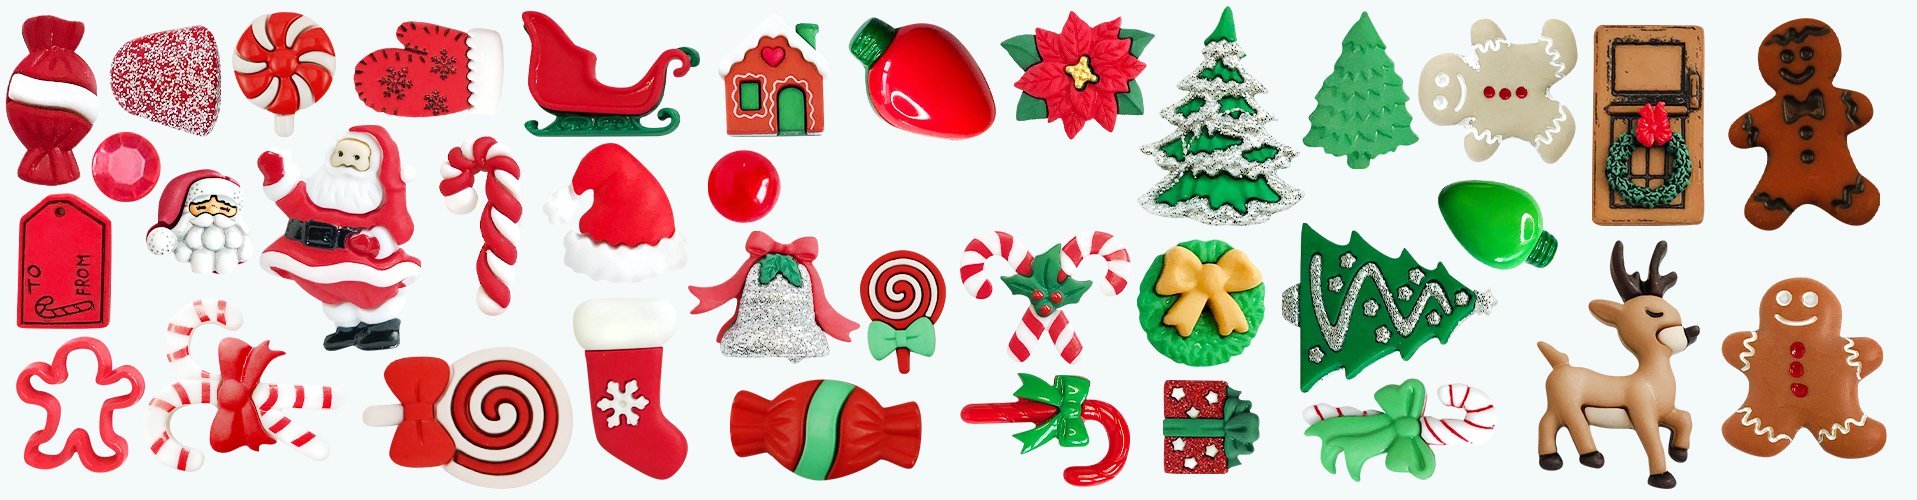 Buttons Galore and More Christmas Collection of Decorative Novelty Buttons Embellishments for Craft and Sewing DIY Holiday Projects (Santa's Sparkle)